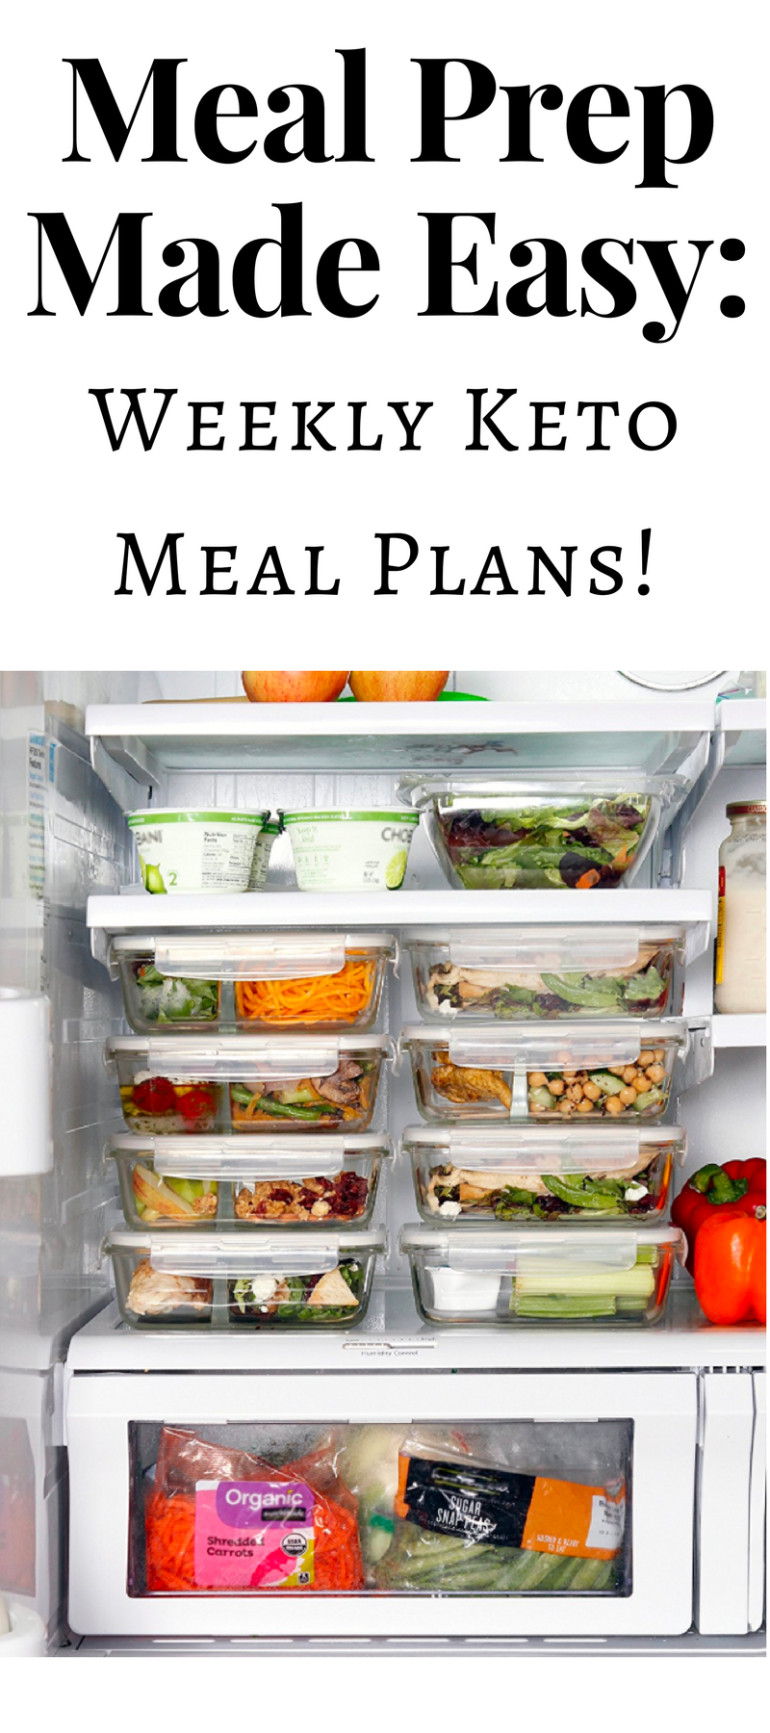 Keto Diet Meal Plan Easy
 Meal Prep Made Easy Weekly Low Carb Keto Meal Plans